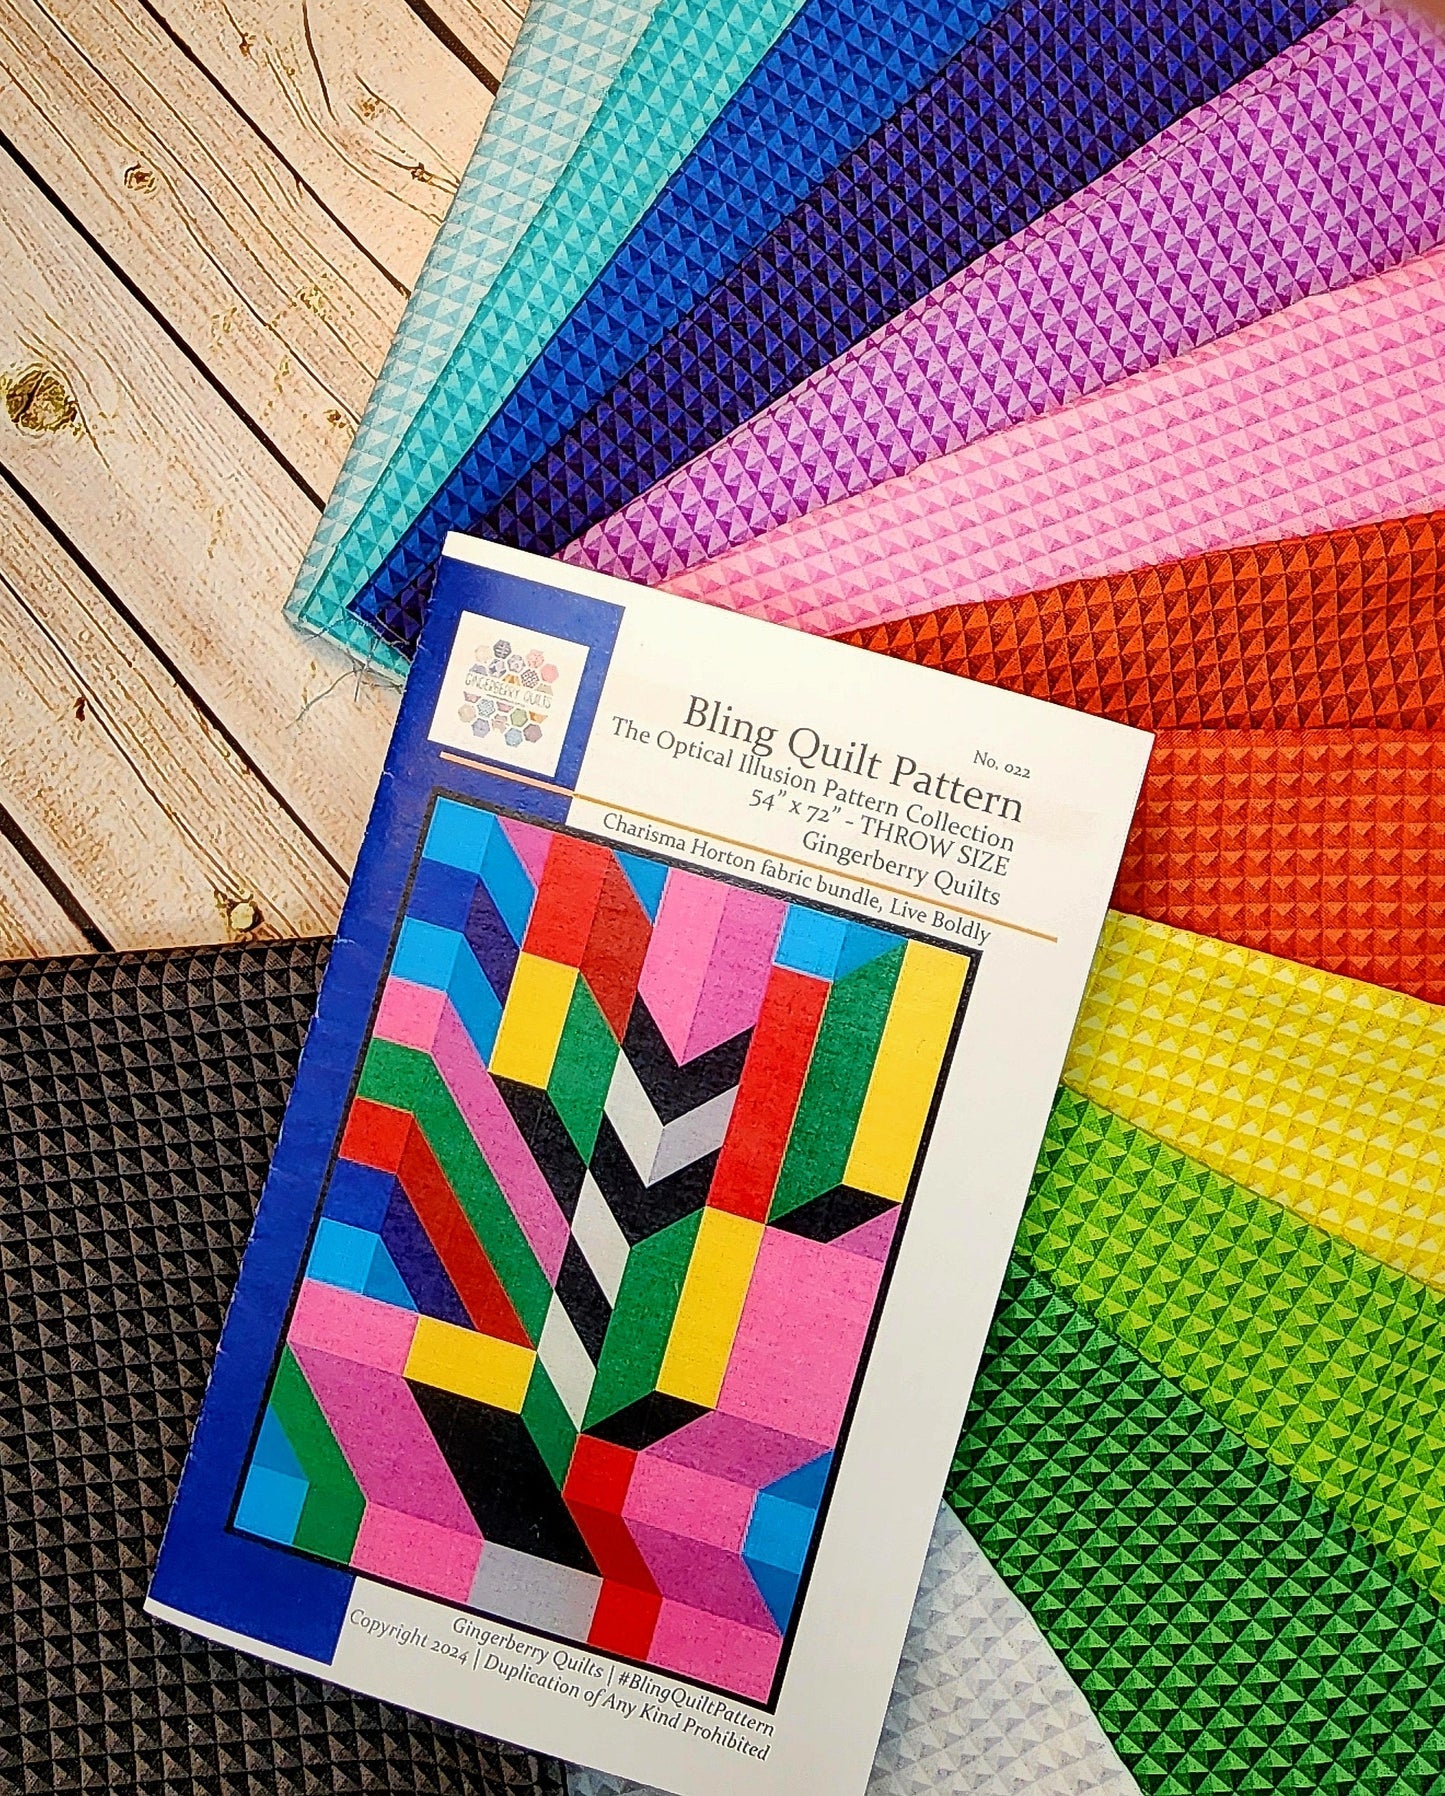 Bling Quilt Pattern - Wholesale bundle of 5 printed booklets